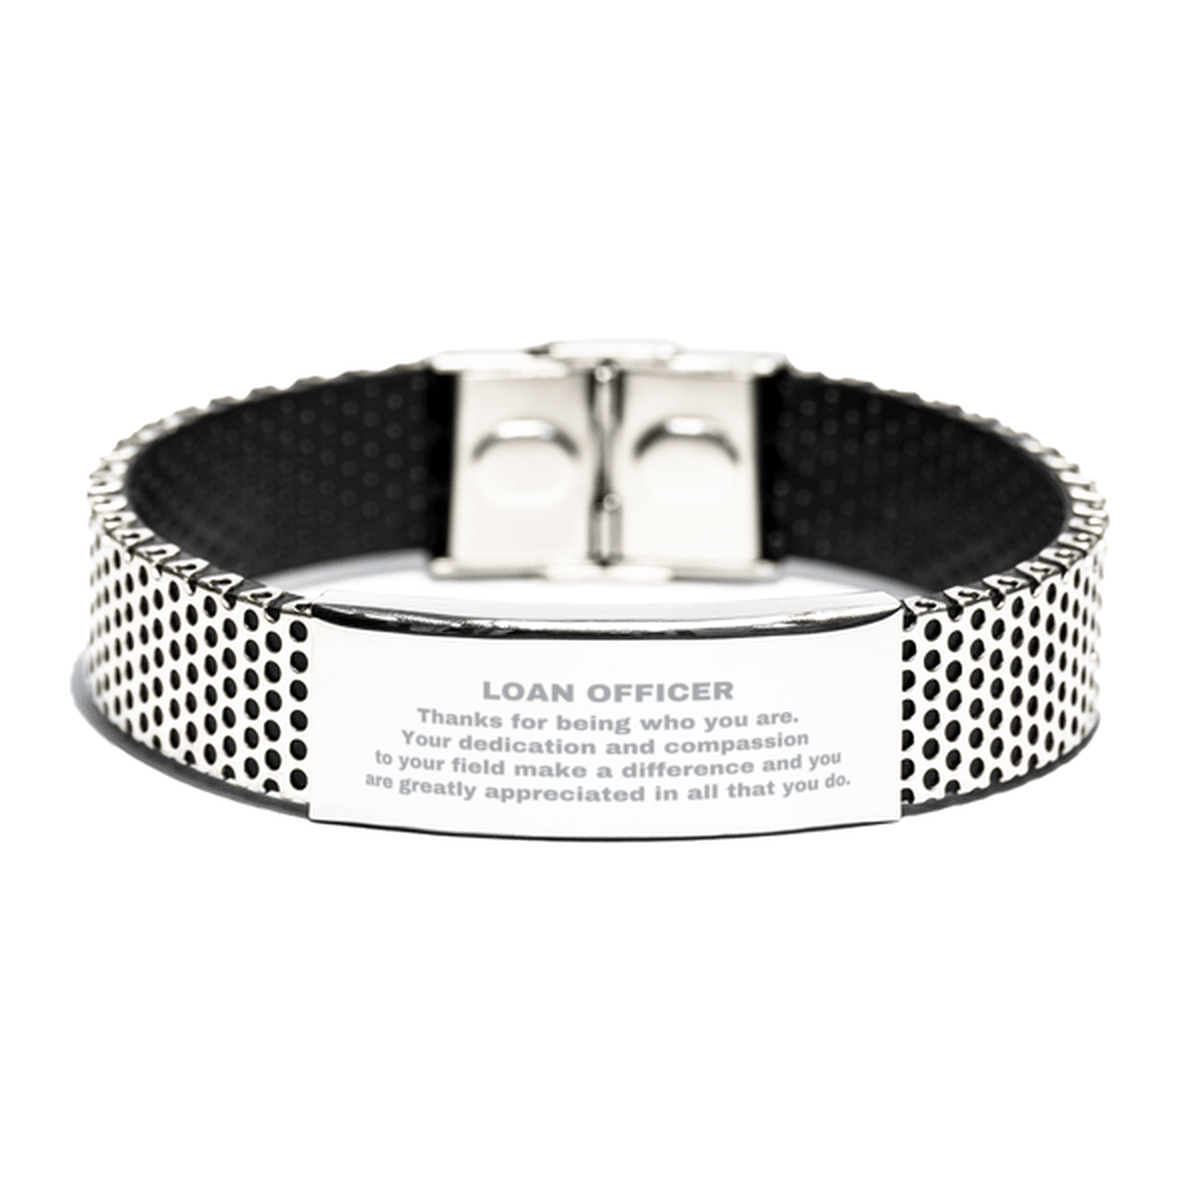 Loan Officer Silver Shark Mesh Stainless Steel Engraved Bracelet - Thanks for being who you are - Birthday Christmas Jewelry Gifts Coworkers Colleague Boss - Mallard Moon Gift Shop